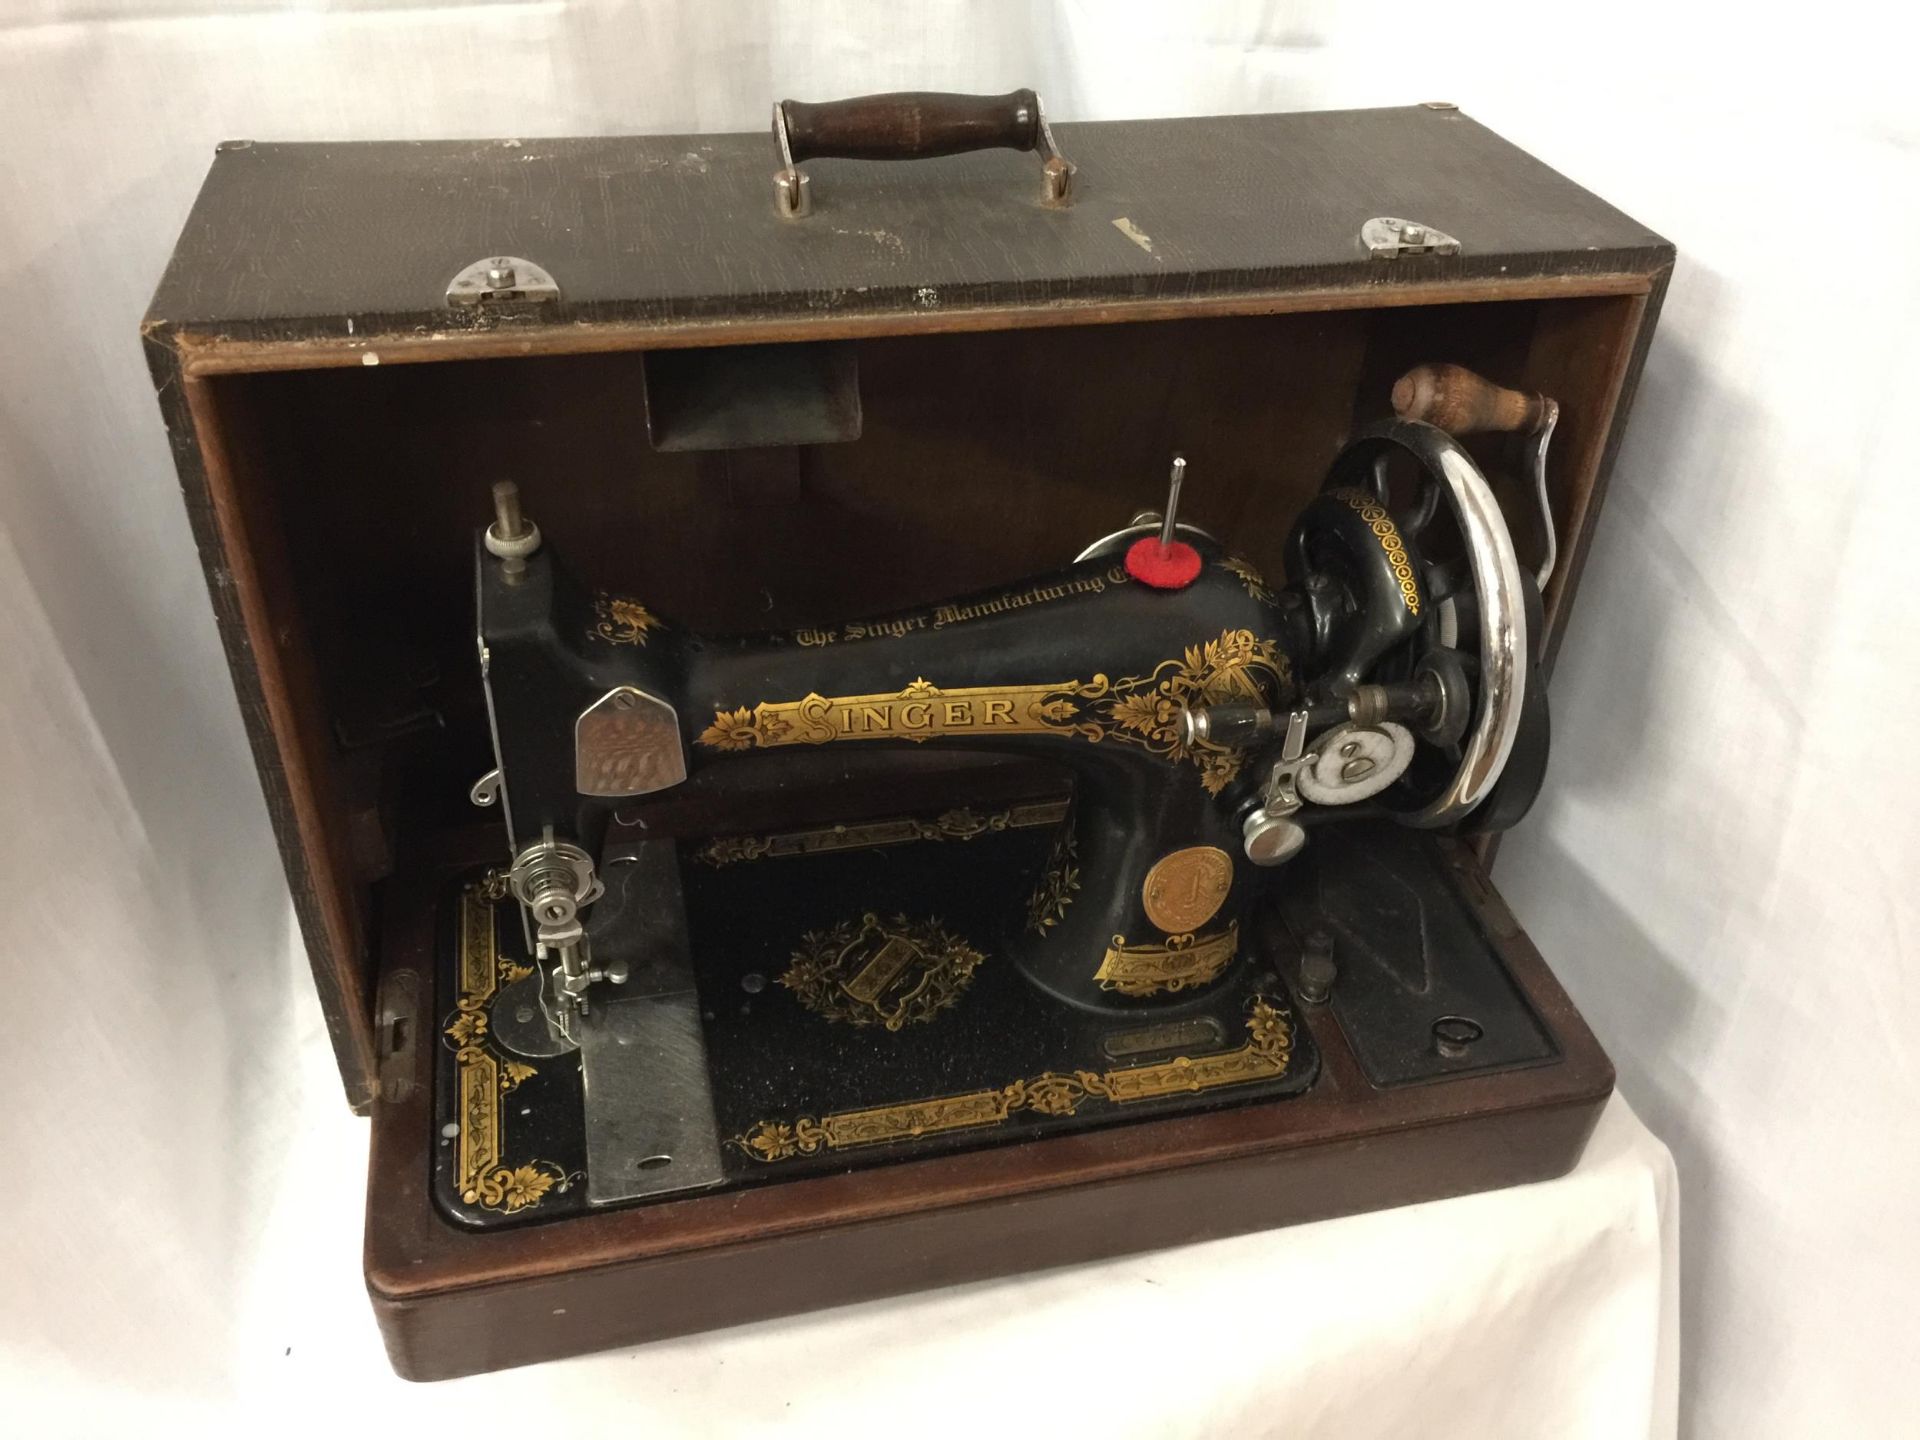 A BOXED VINTAGE SINGER SEWING MACHINE, SERIAL NUMBER EC625798 (WITH FRONT COVER) - Image 2 of 4